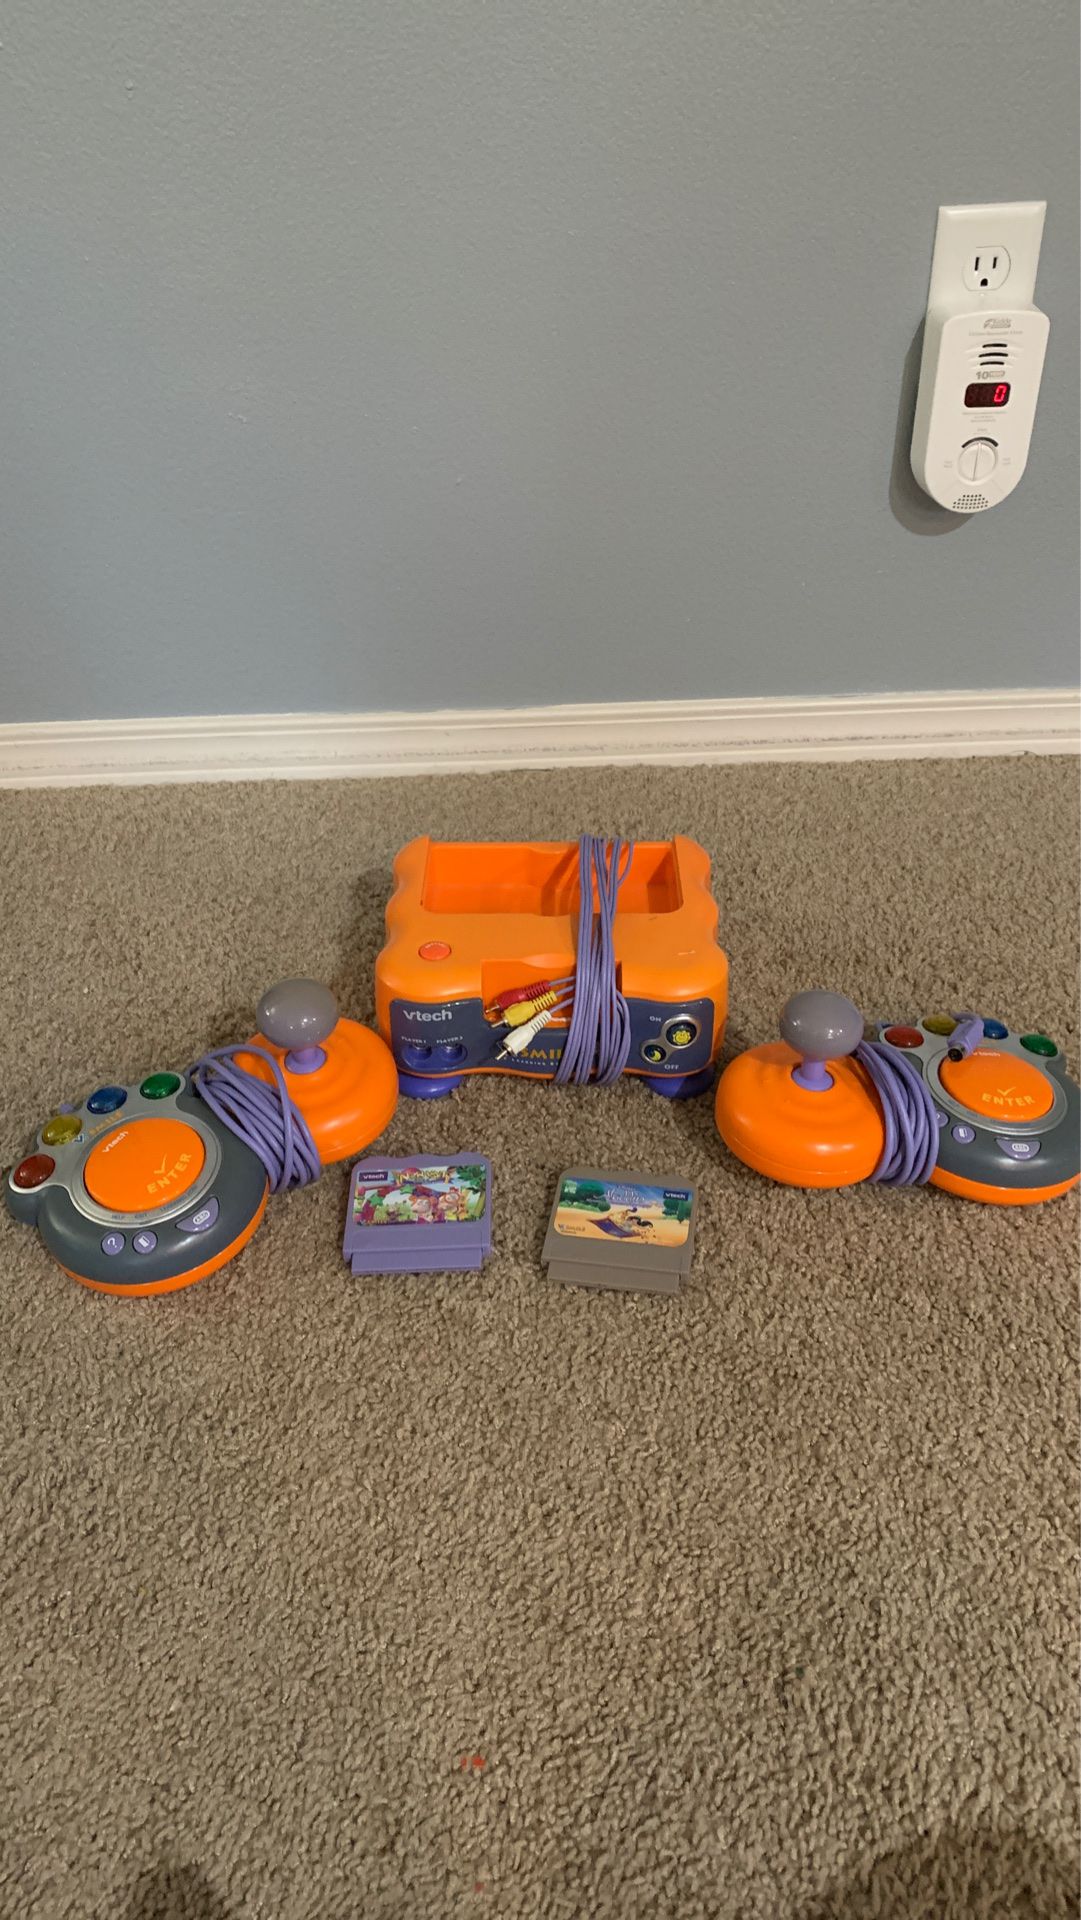 Vtech game console